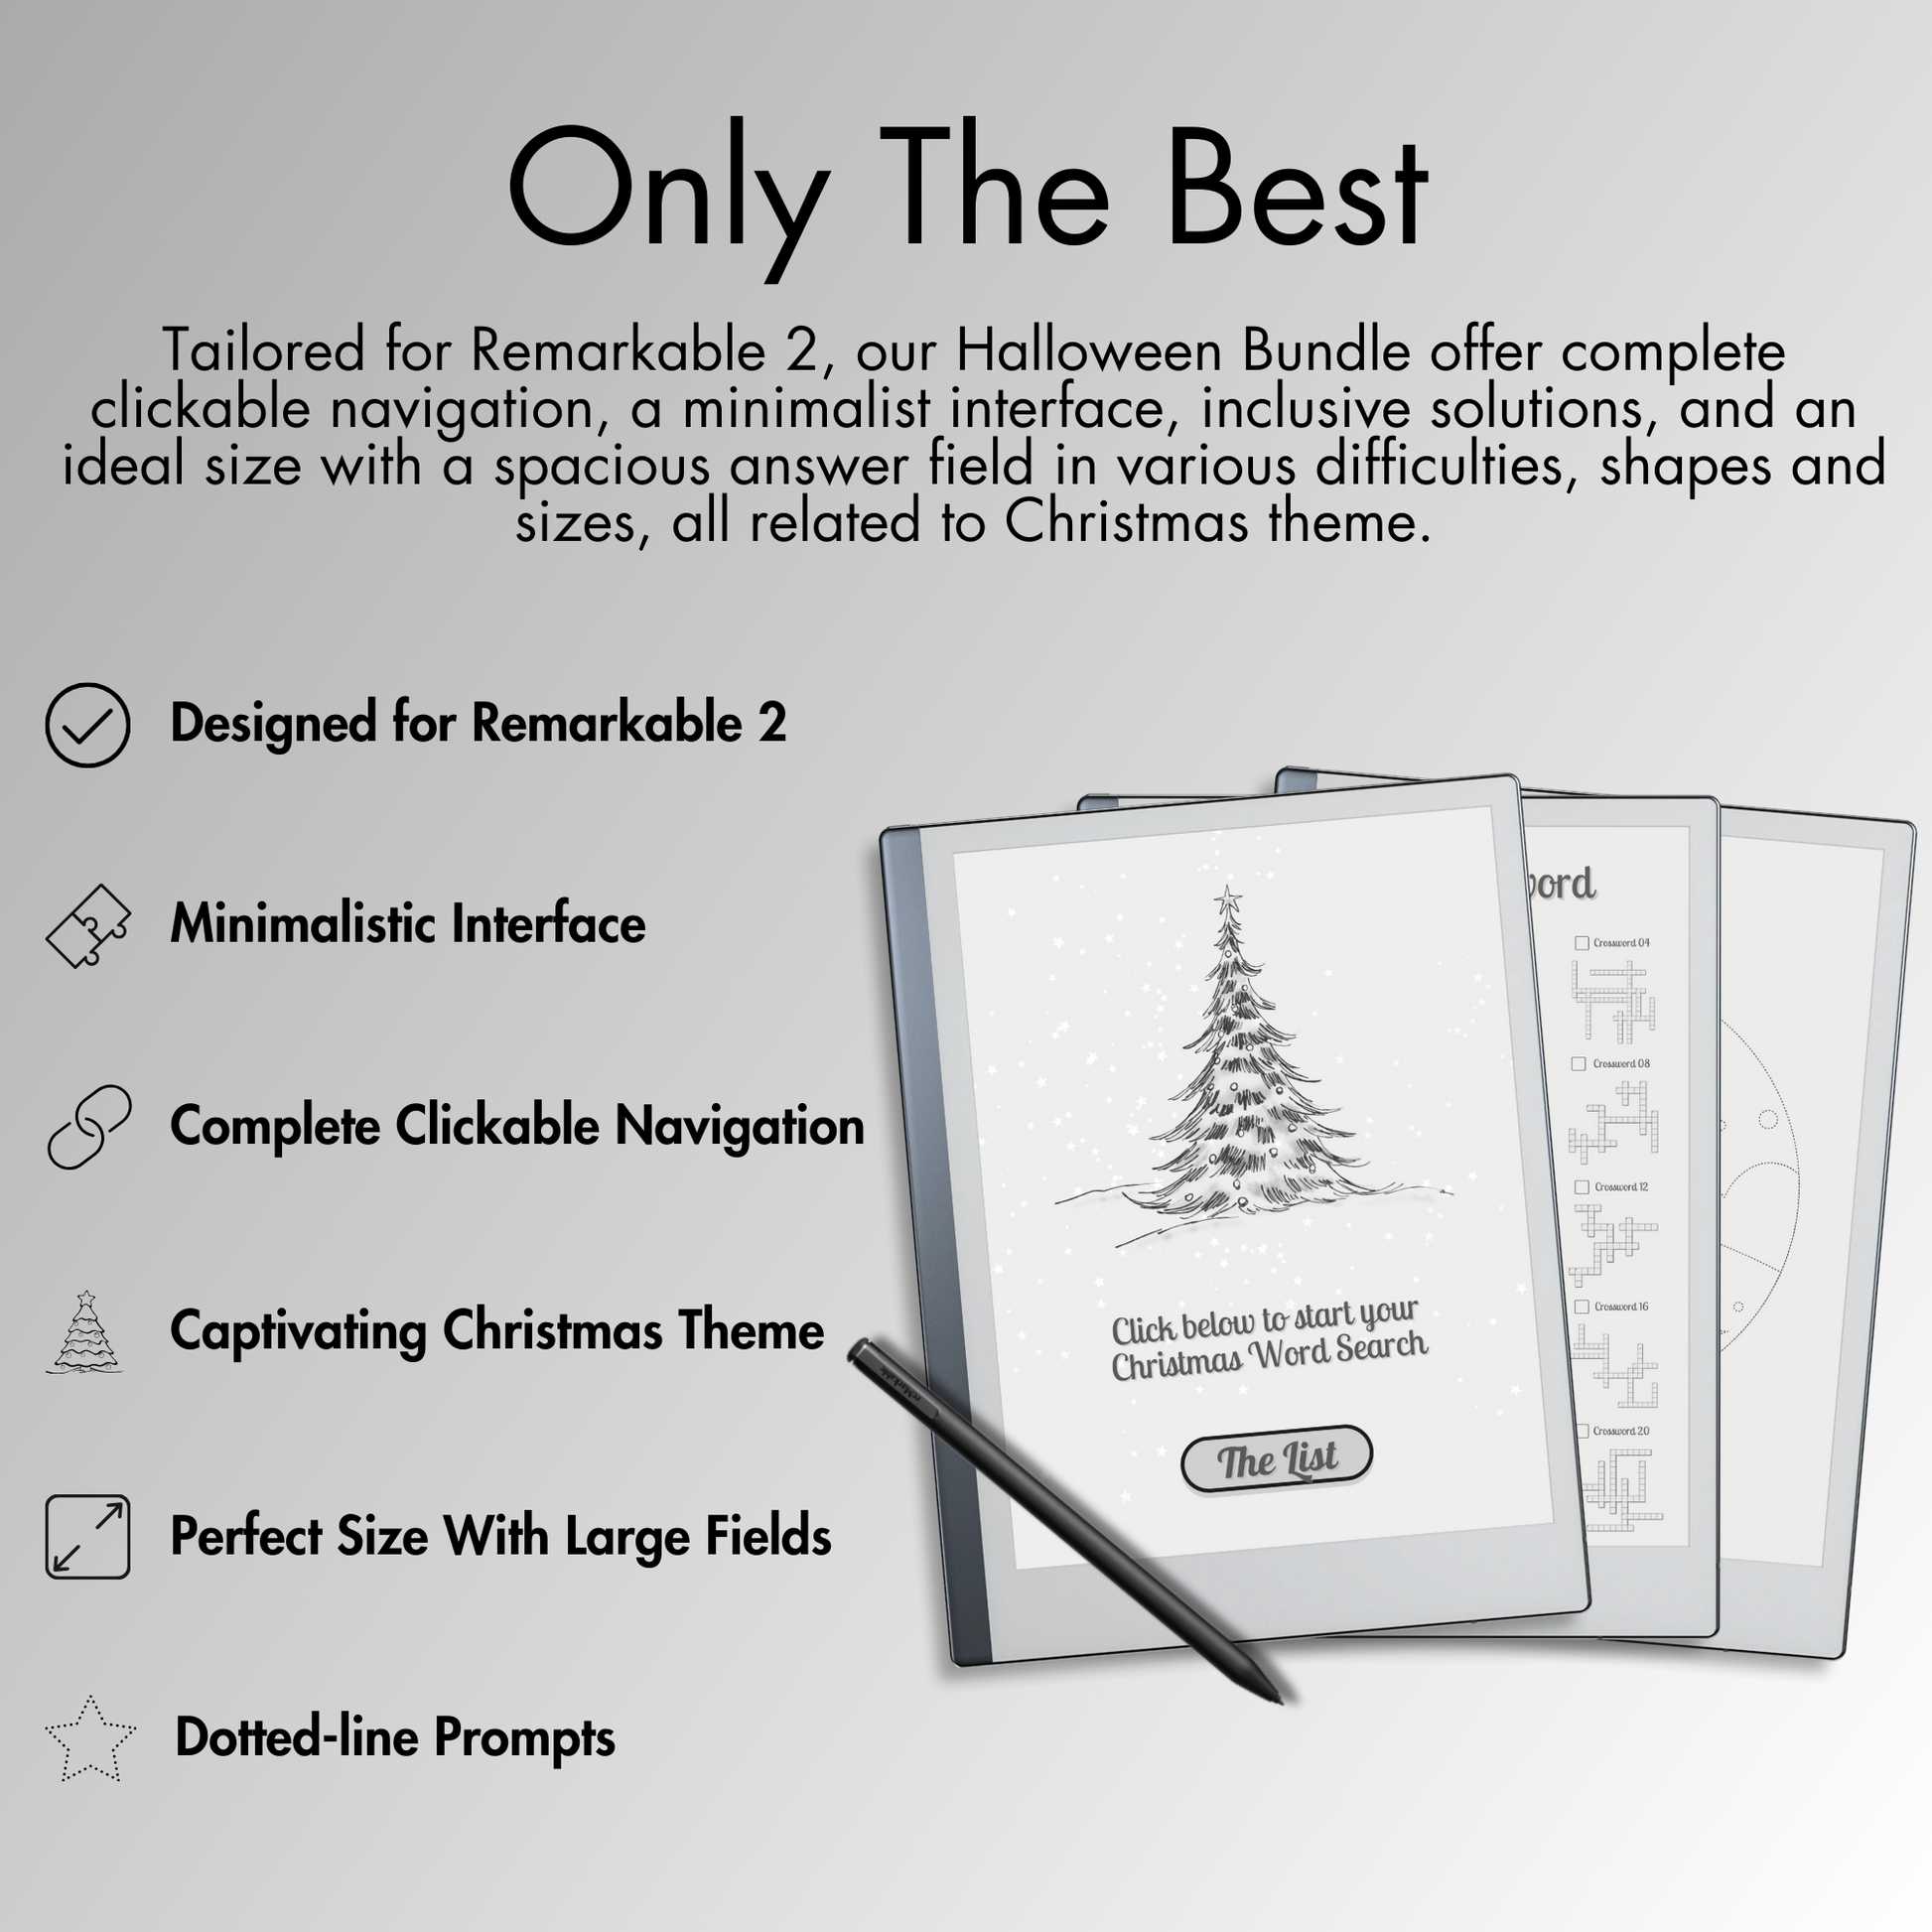 The Bundle offers complete clickable navigation, a minimalist interface, inclusive solutions, and an ideal size with a spacious answer field in various holiday-themed difficulties, shapes, and sizes for Remarkable 2's e-ink screen, perfect for adding festive cheer to your holiday season.